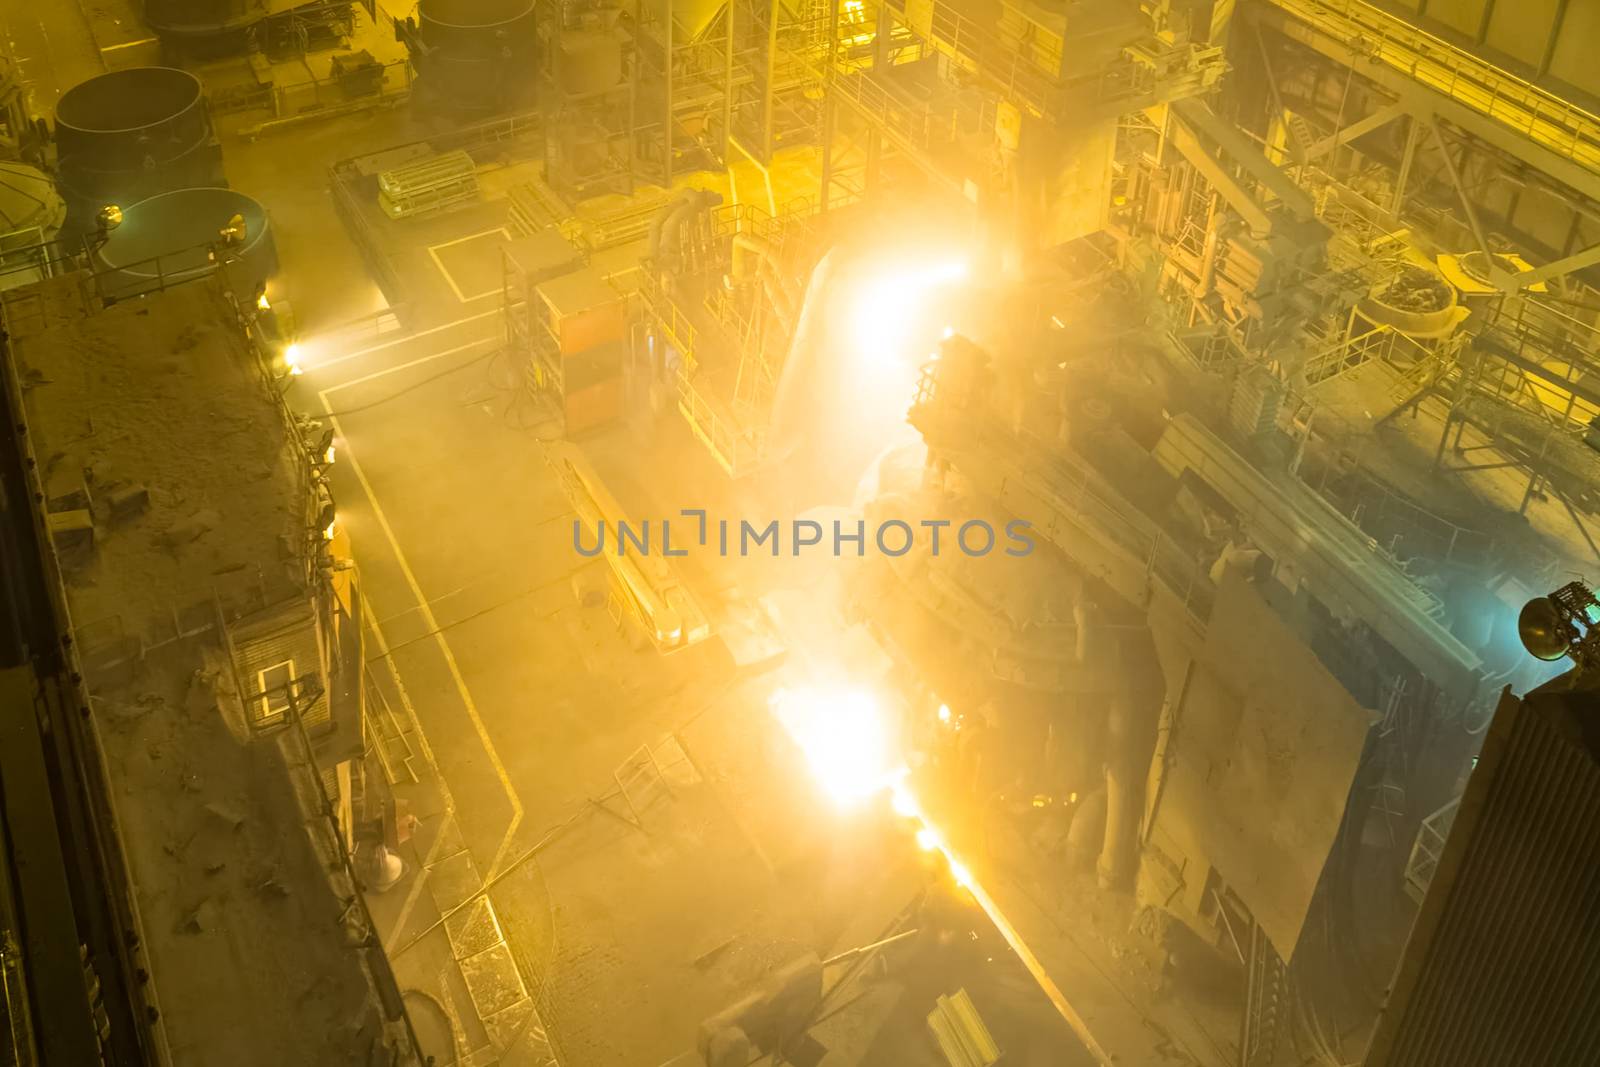 Electric arc furnace. Steel melting plant by nyrok